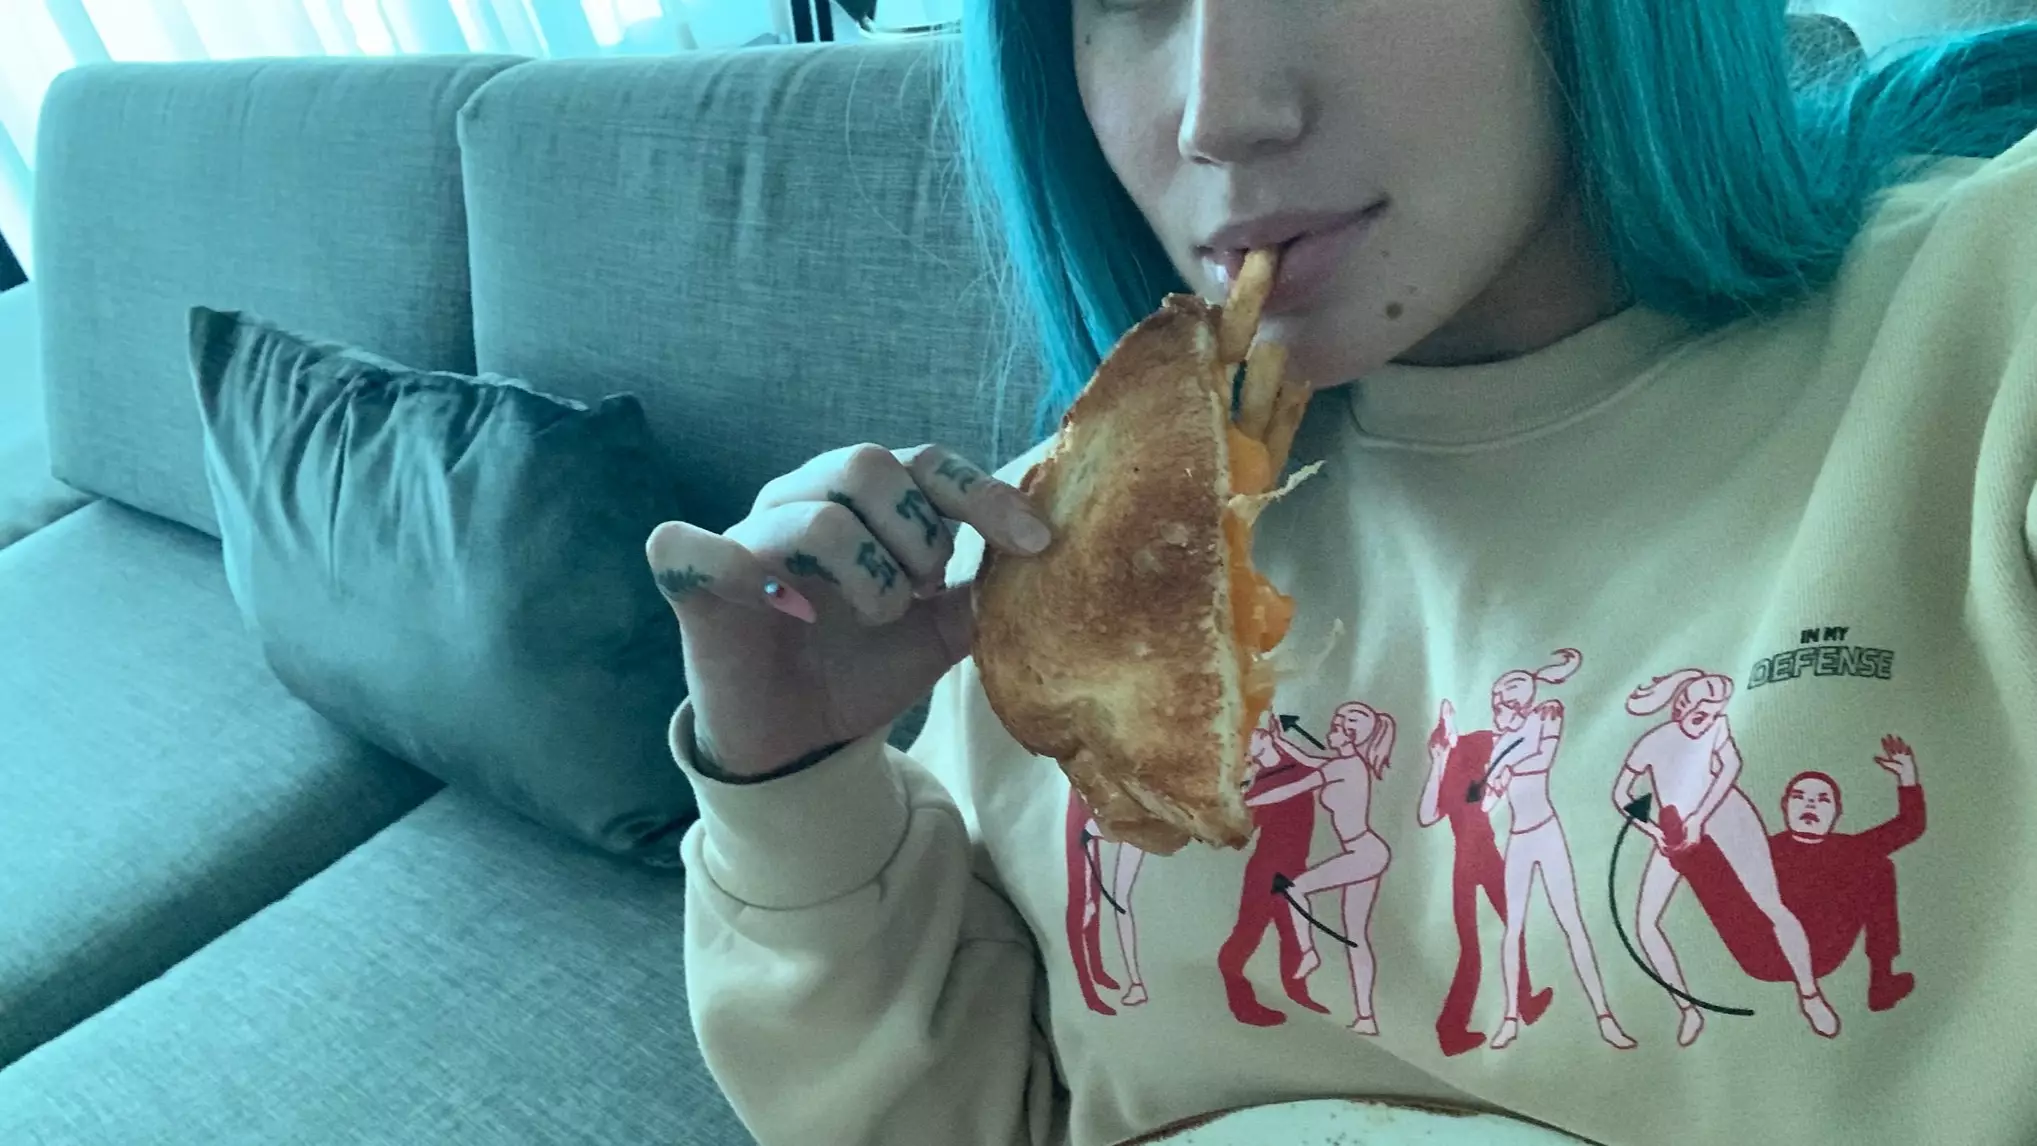 Iggy Azalea Paid £52 For A Grilled Cheese Sandwich In A Las Vegas Hotel And She's Not Happy